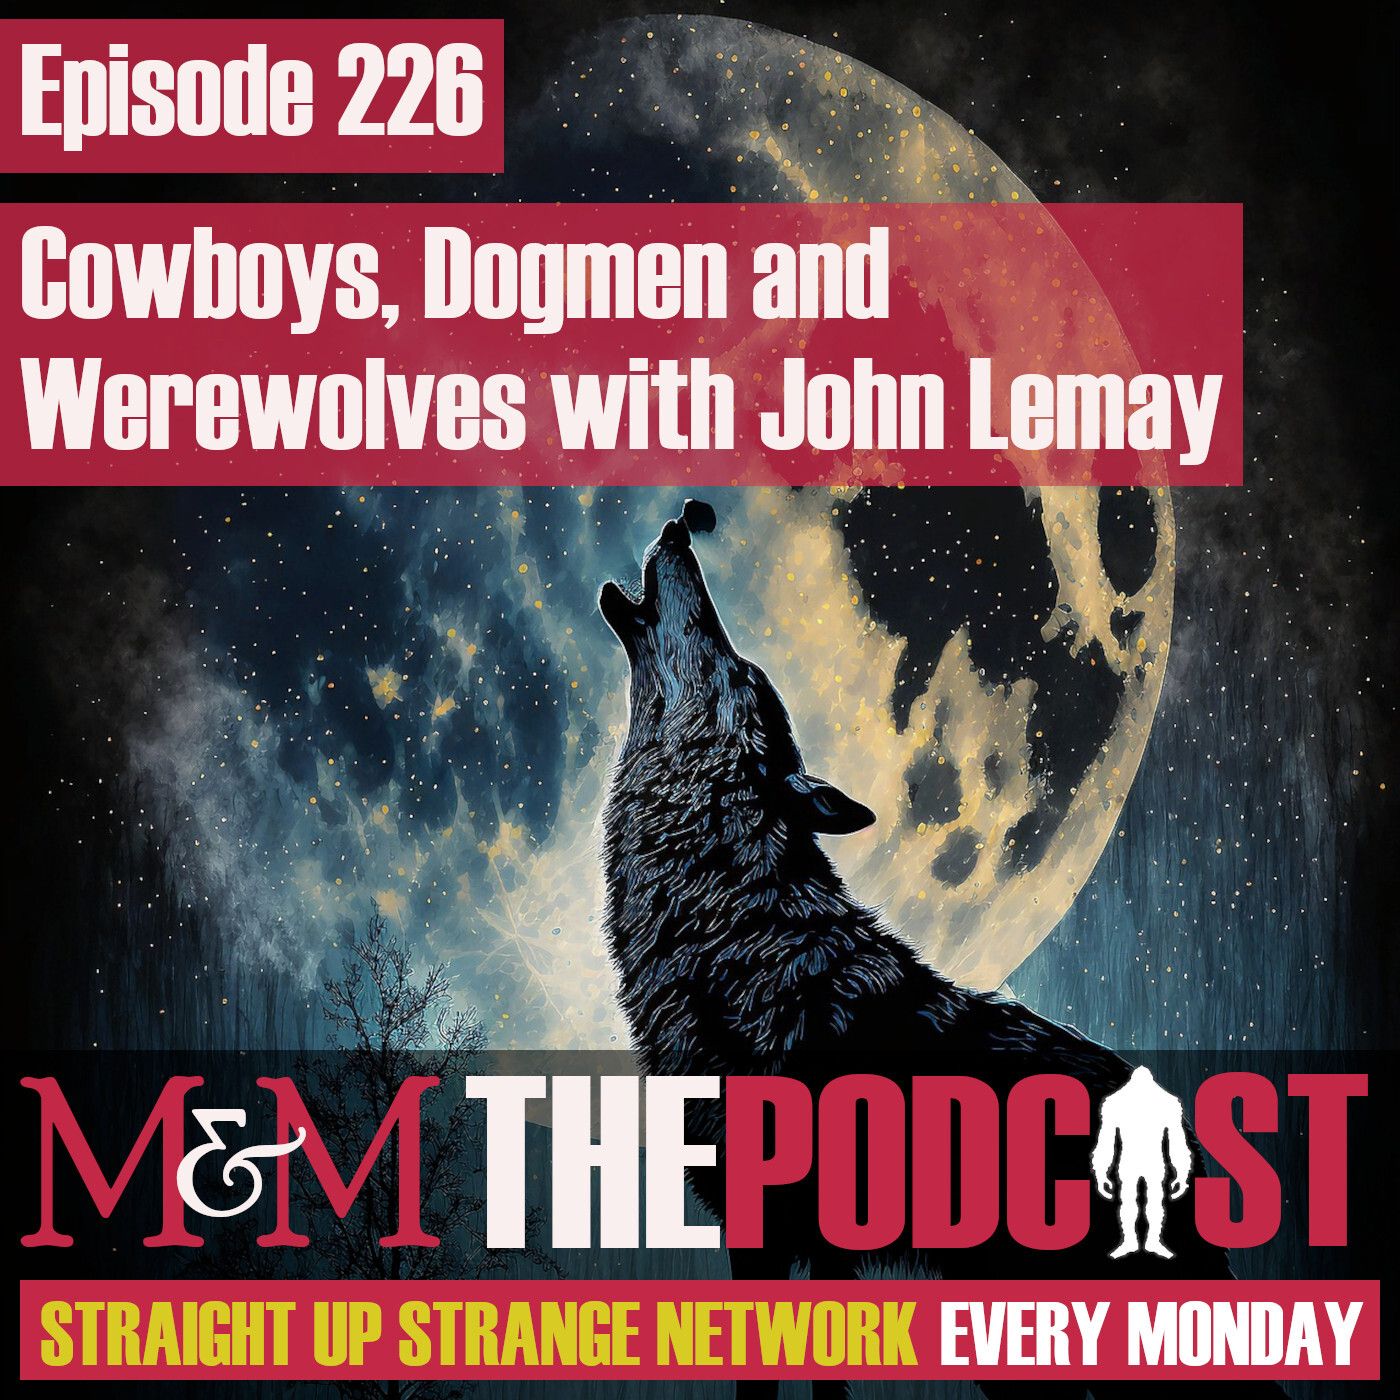 Mysteries and Monsters: Episode 226 Cowboys, Dogmen and Werewolves with John Lemay